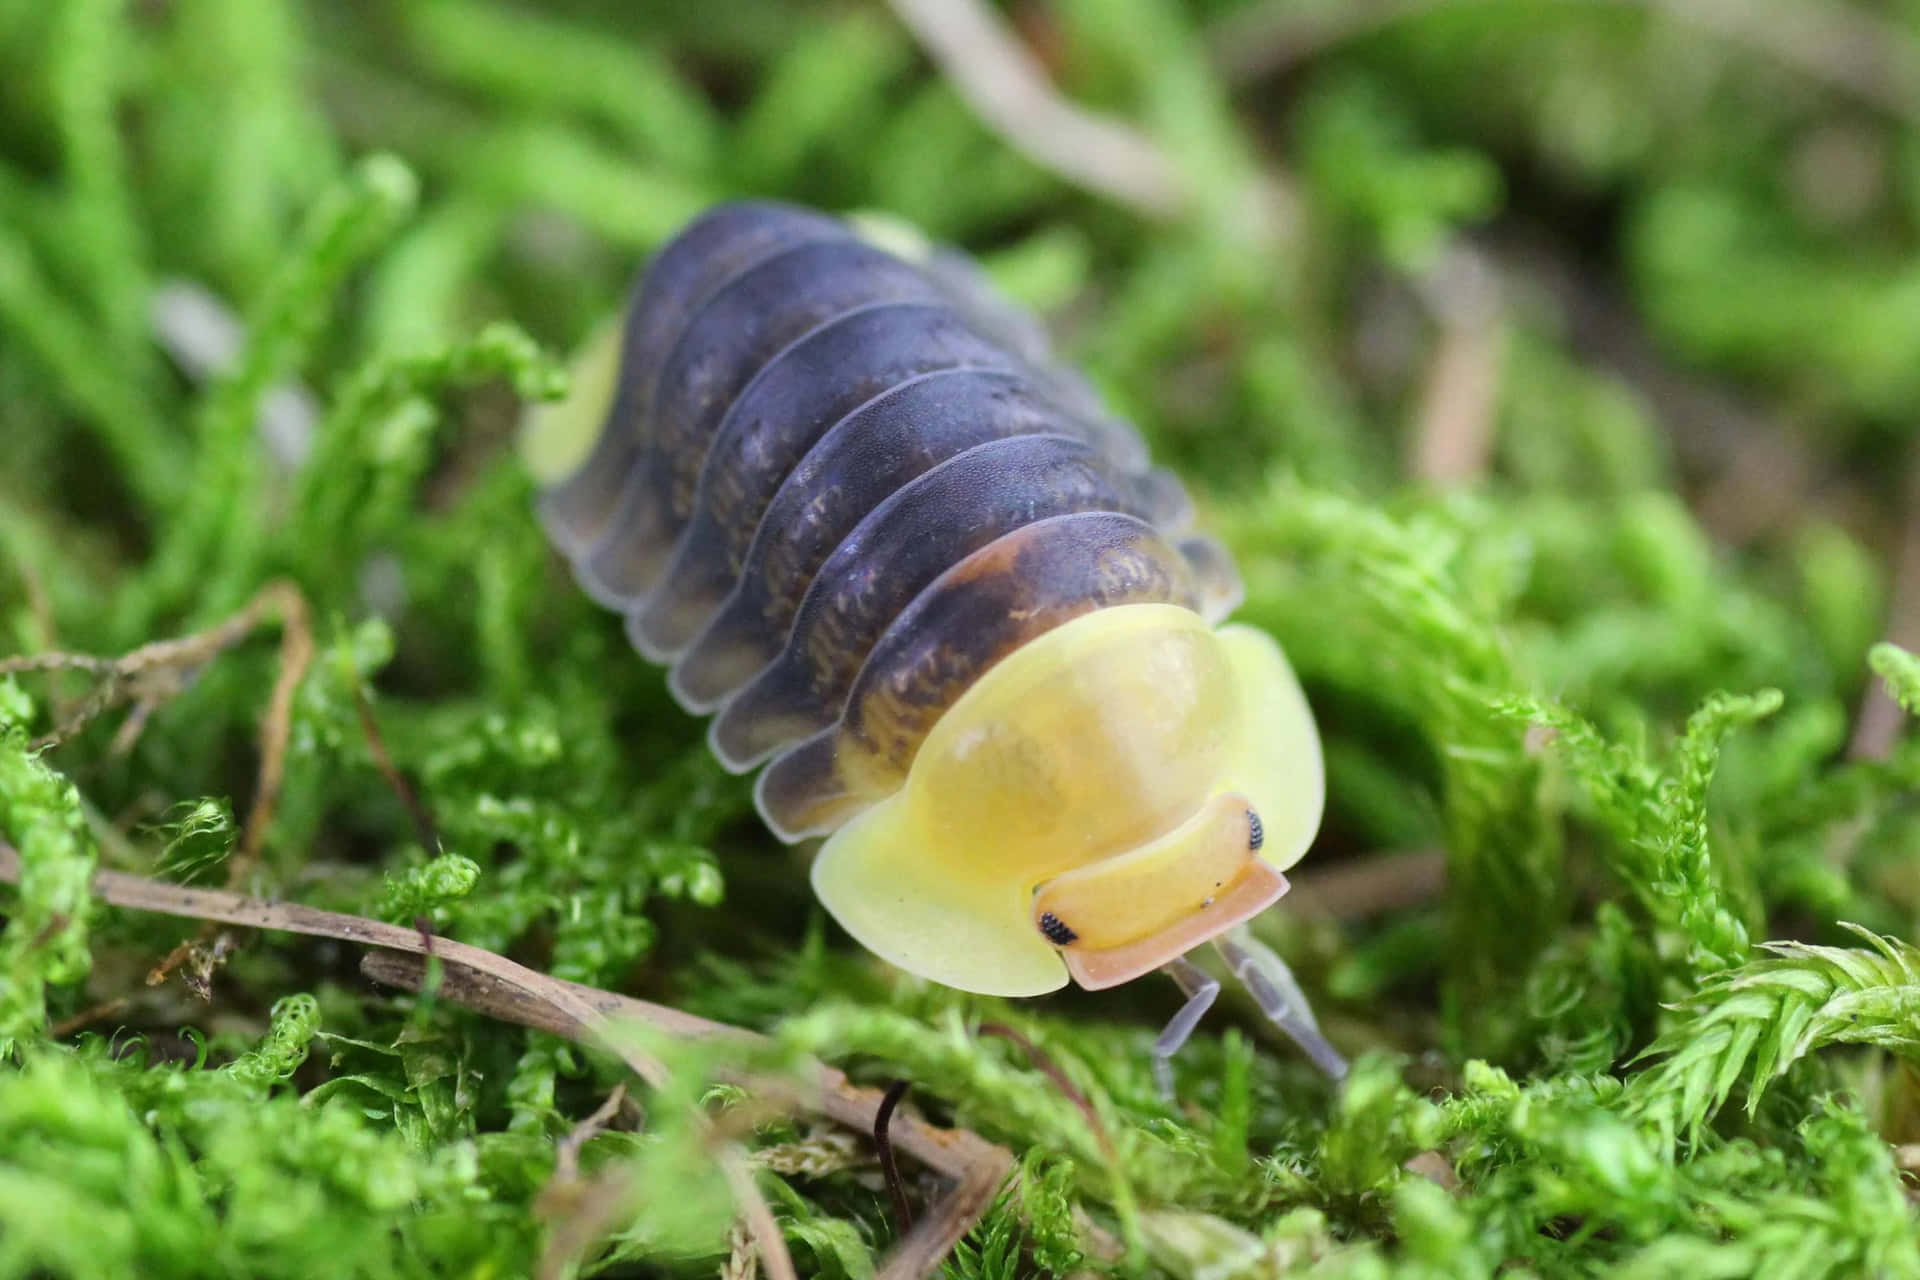 Close-up Image Of An Isopod Creature Wallpaper